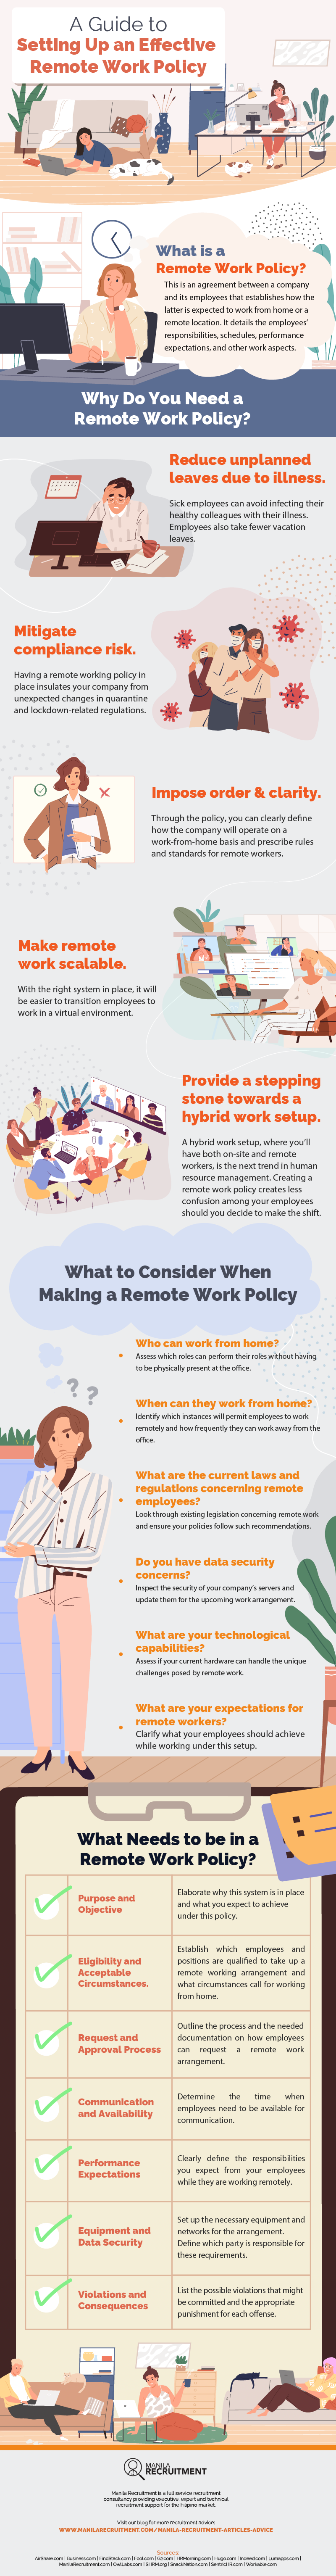 A Guide to Setting Up an Effective Remote Work Policy | Blog